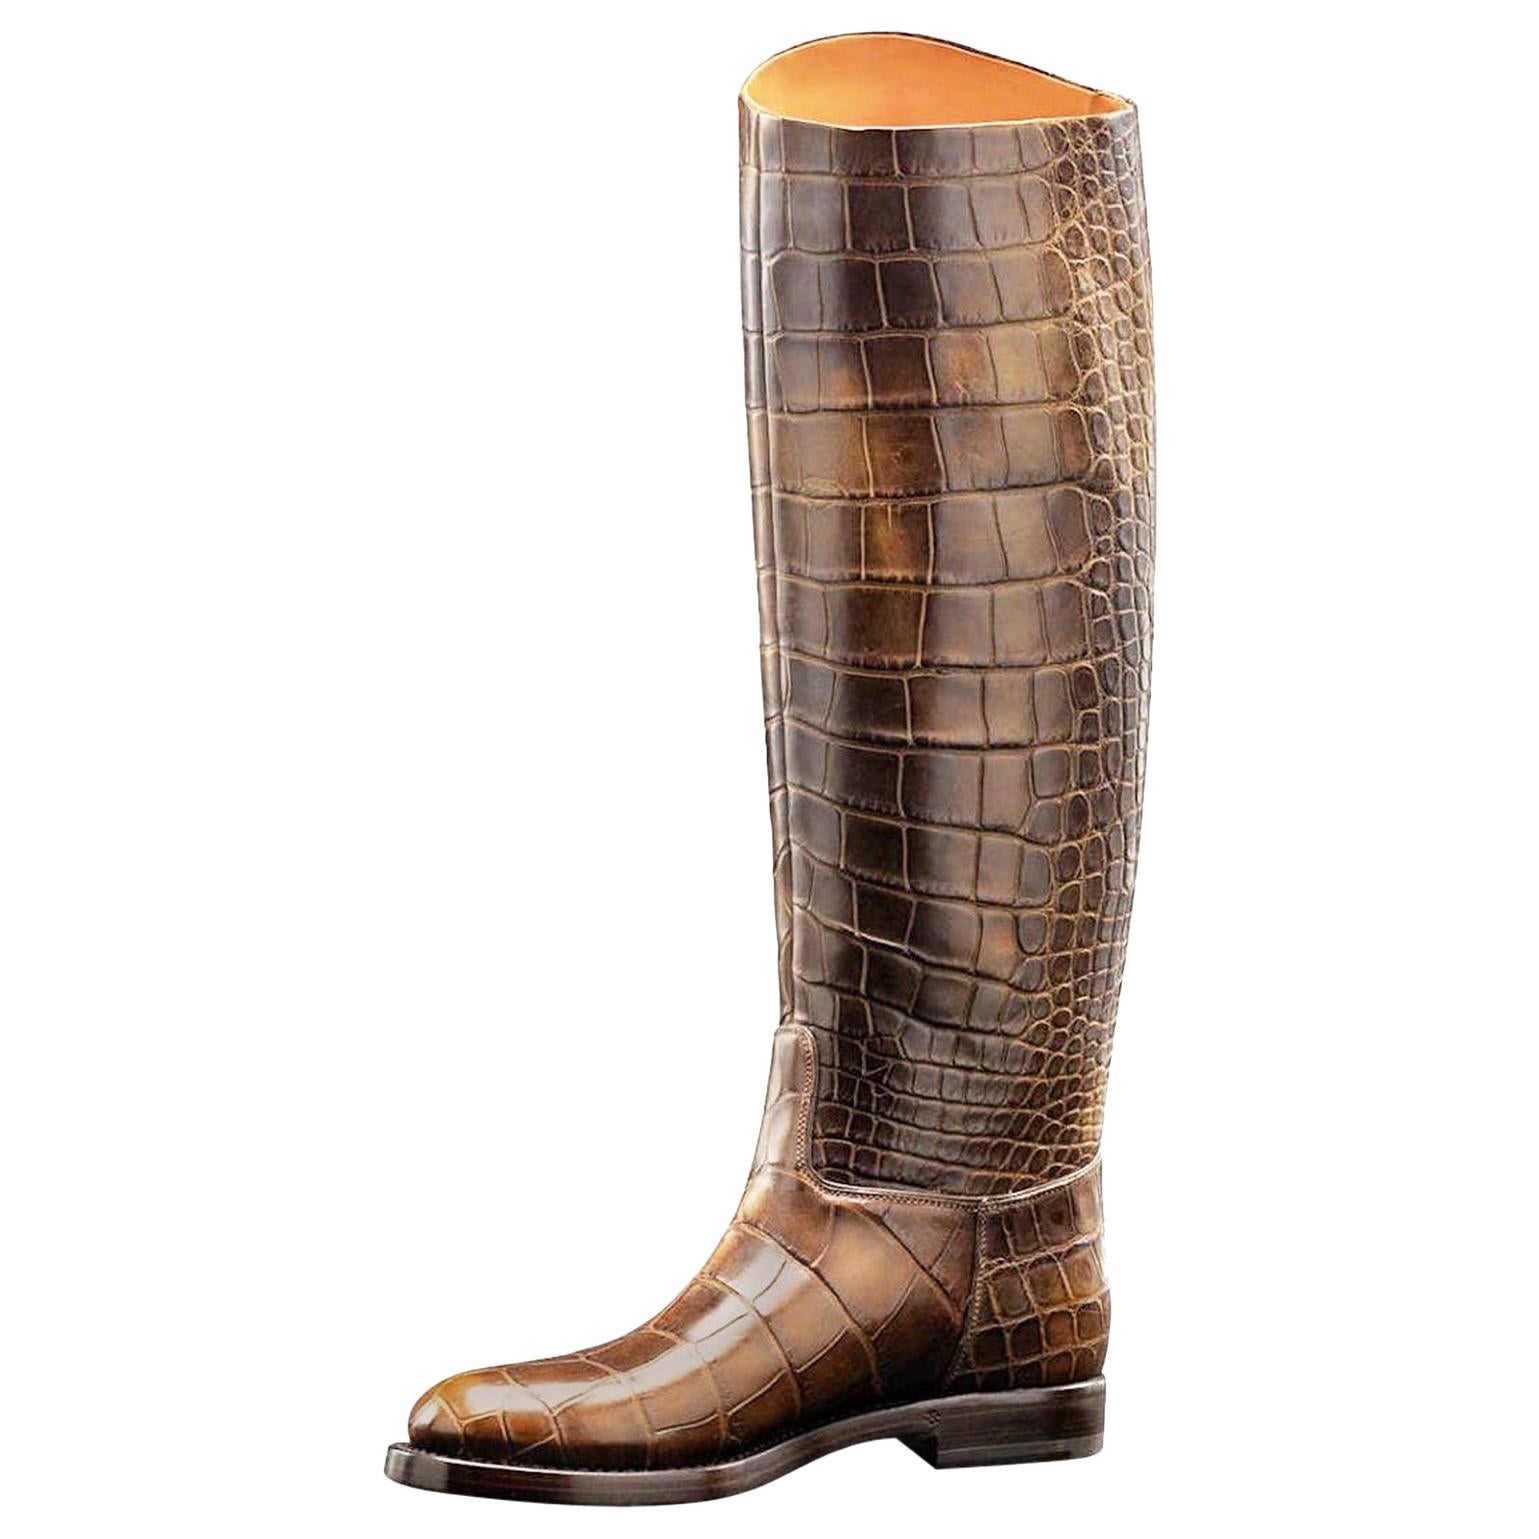 NEW Gucci Exotic Crocodile Skin 1921 Collection Crest Riding Style Boots 38